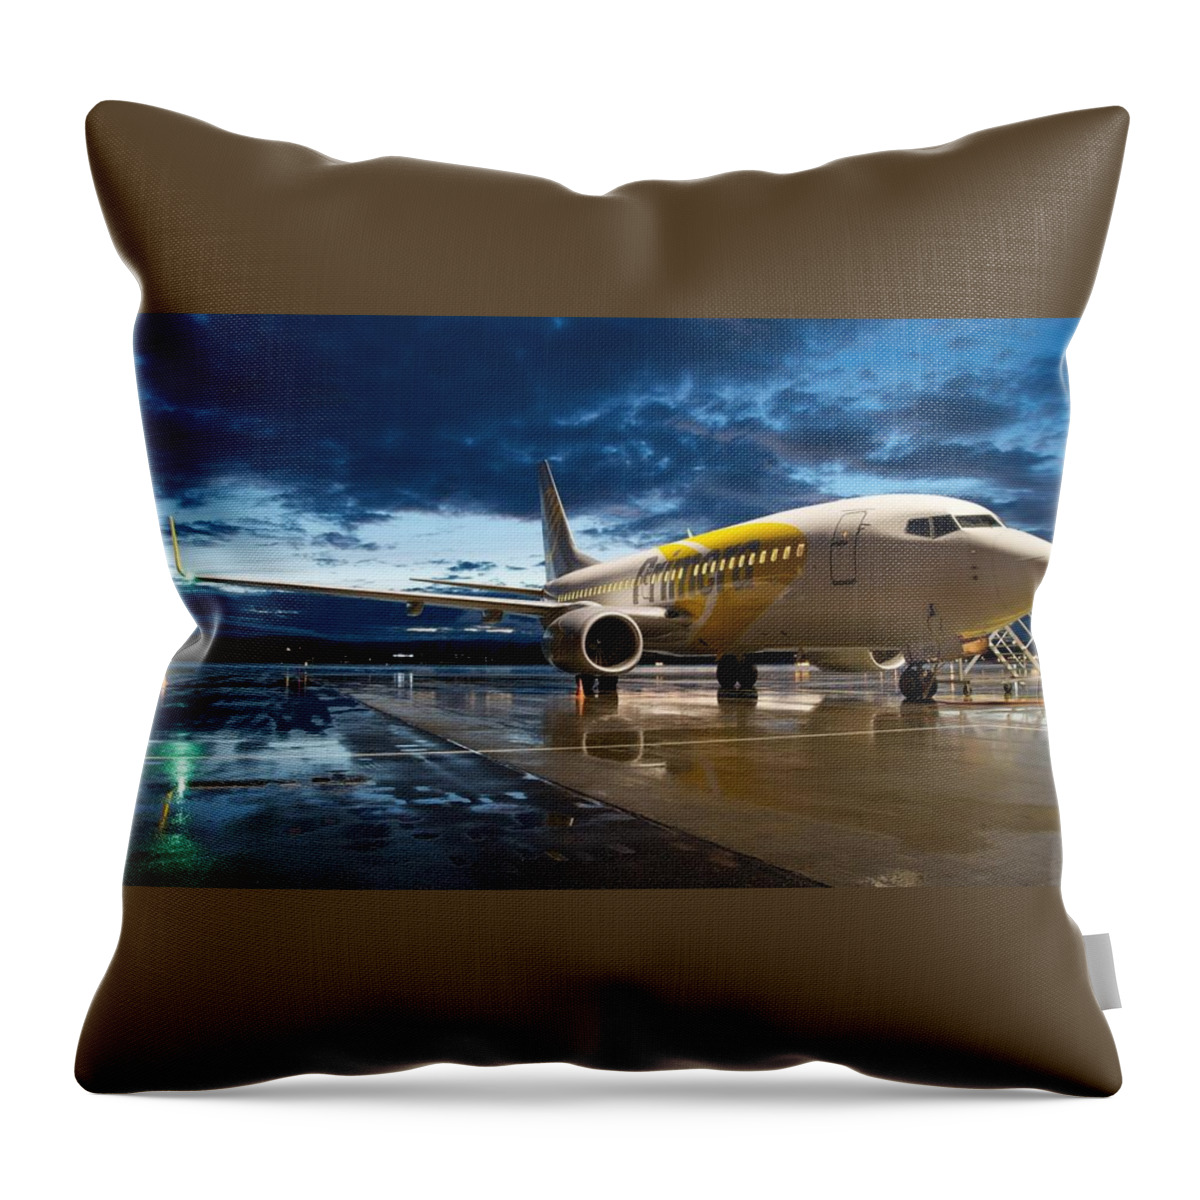 Boeing 737 Throw Pillow featuring the photograph Boeing 737 by Jackie Russo